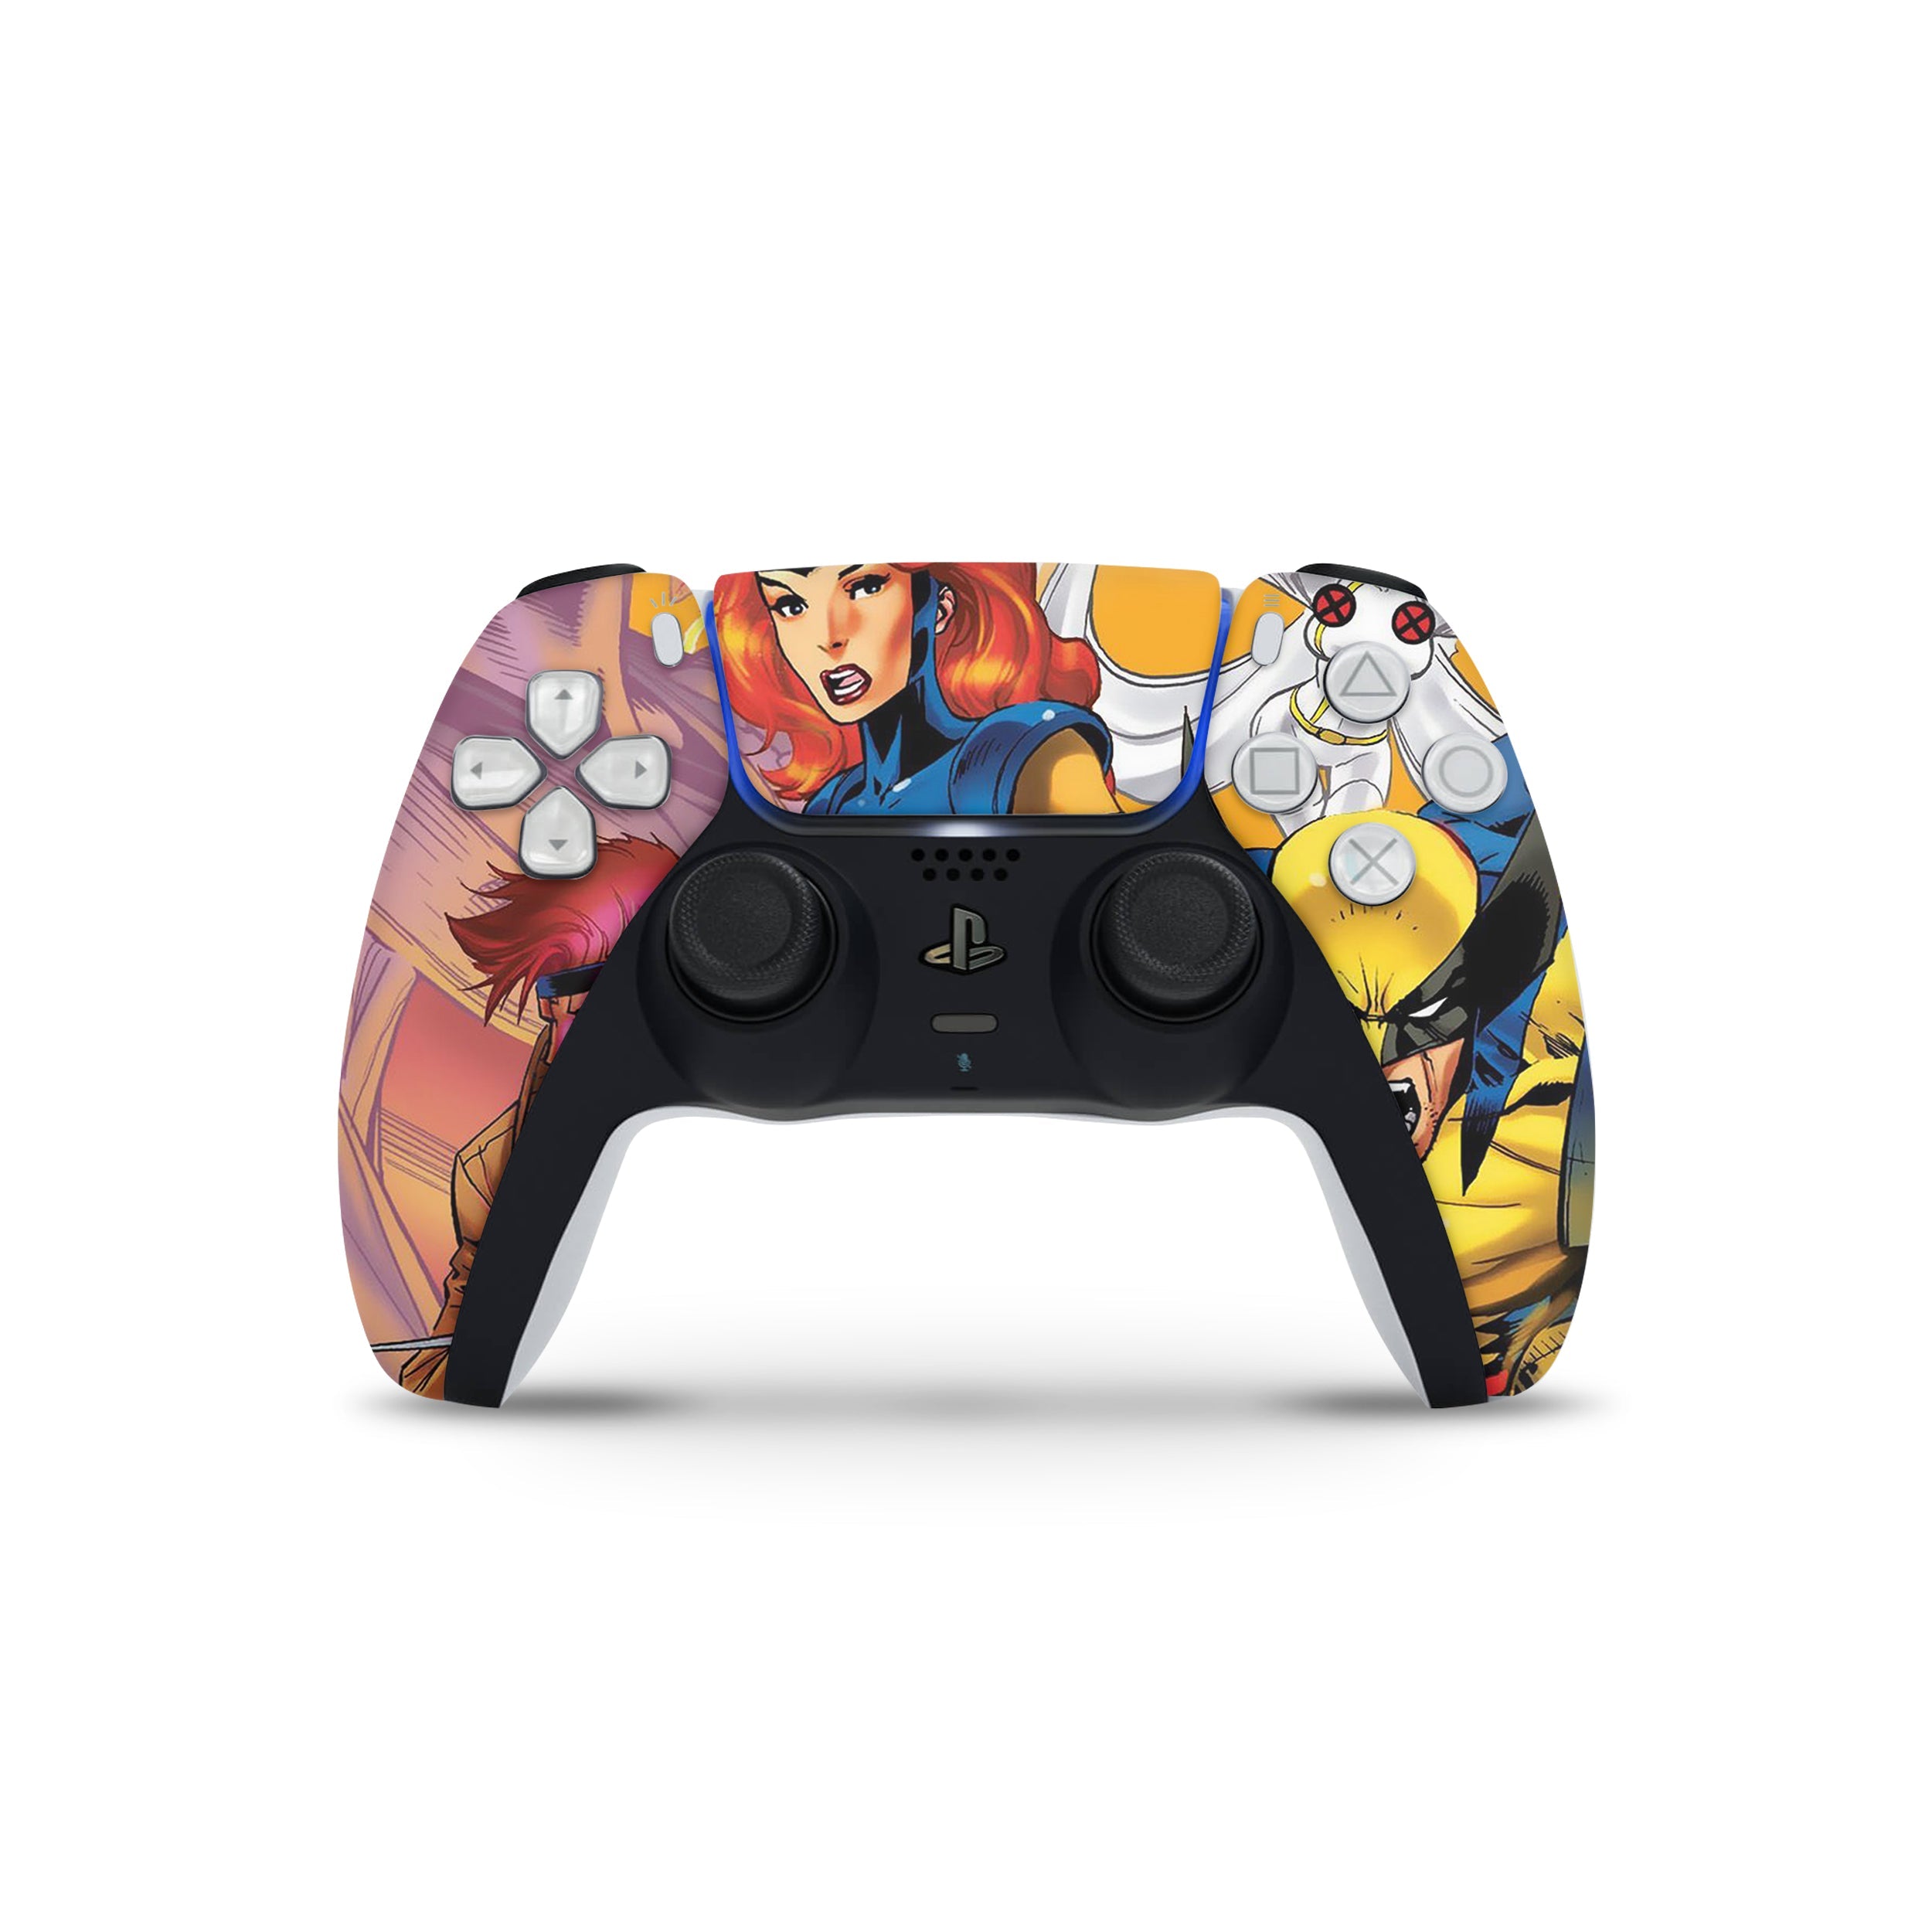 A video game skin featuring a Marvel X Men design for the PS5 DualSense Controller.